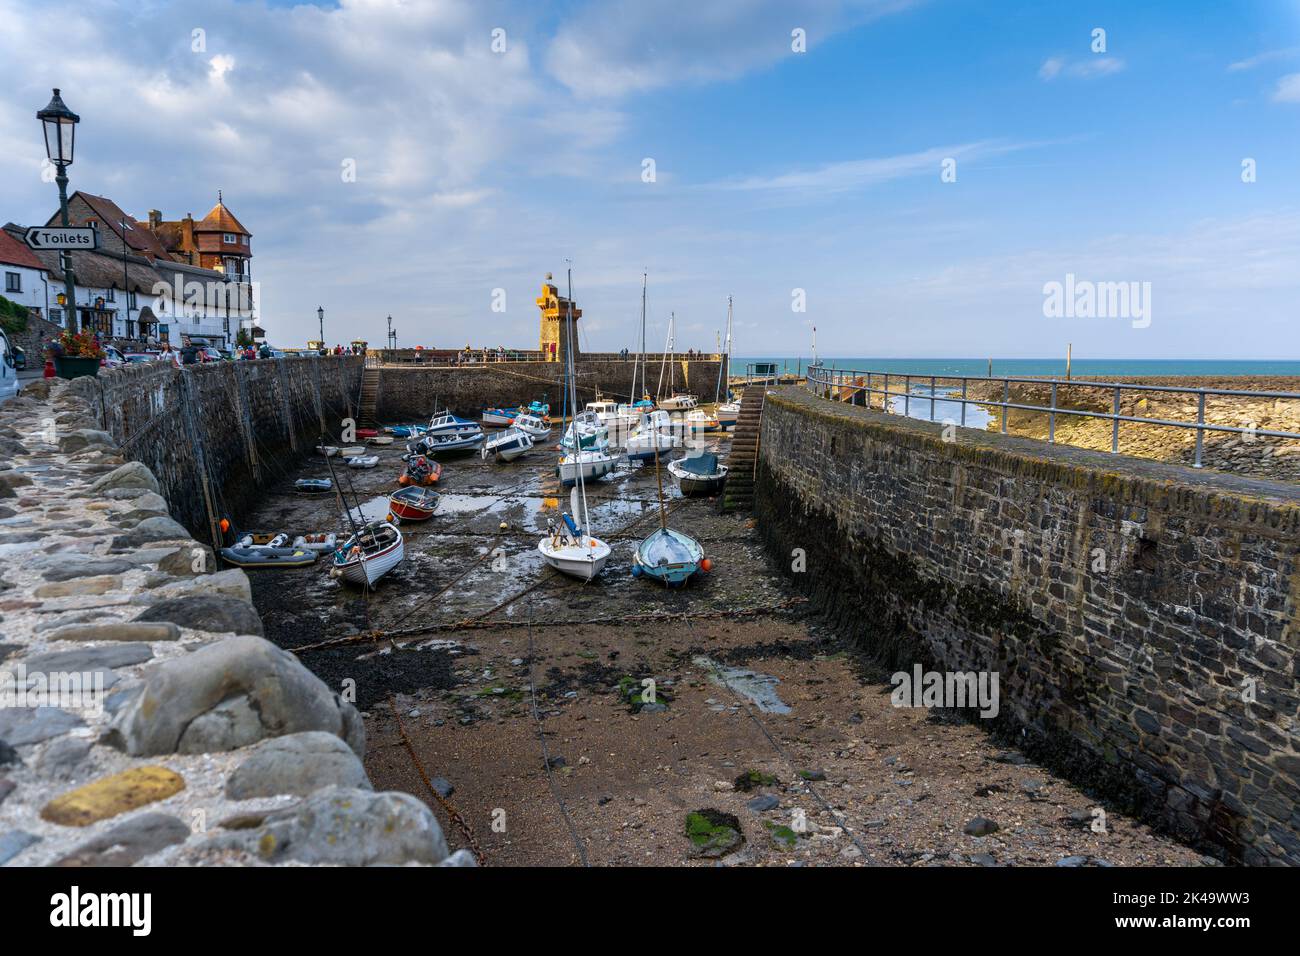 Lynton and Lynmouth, united Kingdom - 2 September, 2022: view of the East Lyn rivermouth and Lynmouth Harbor with many boats stuck at low tide Stock Photo